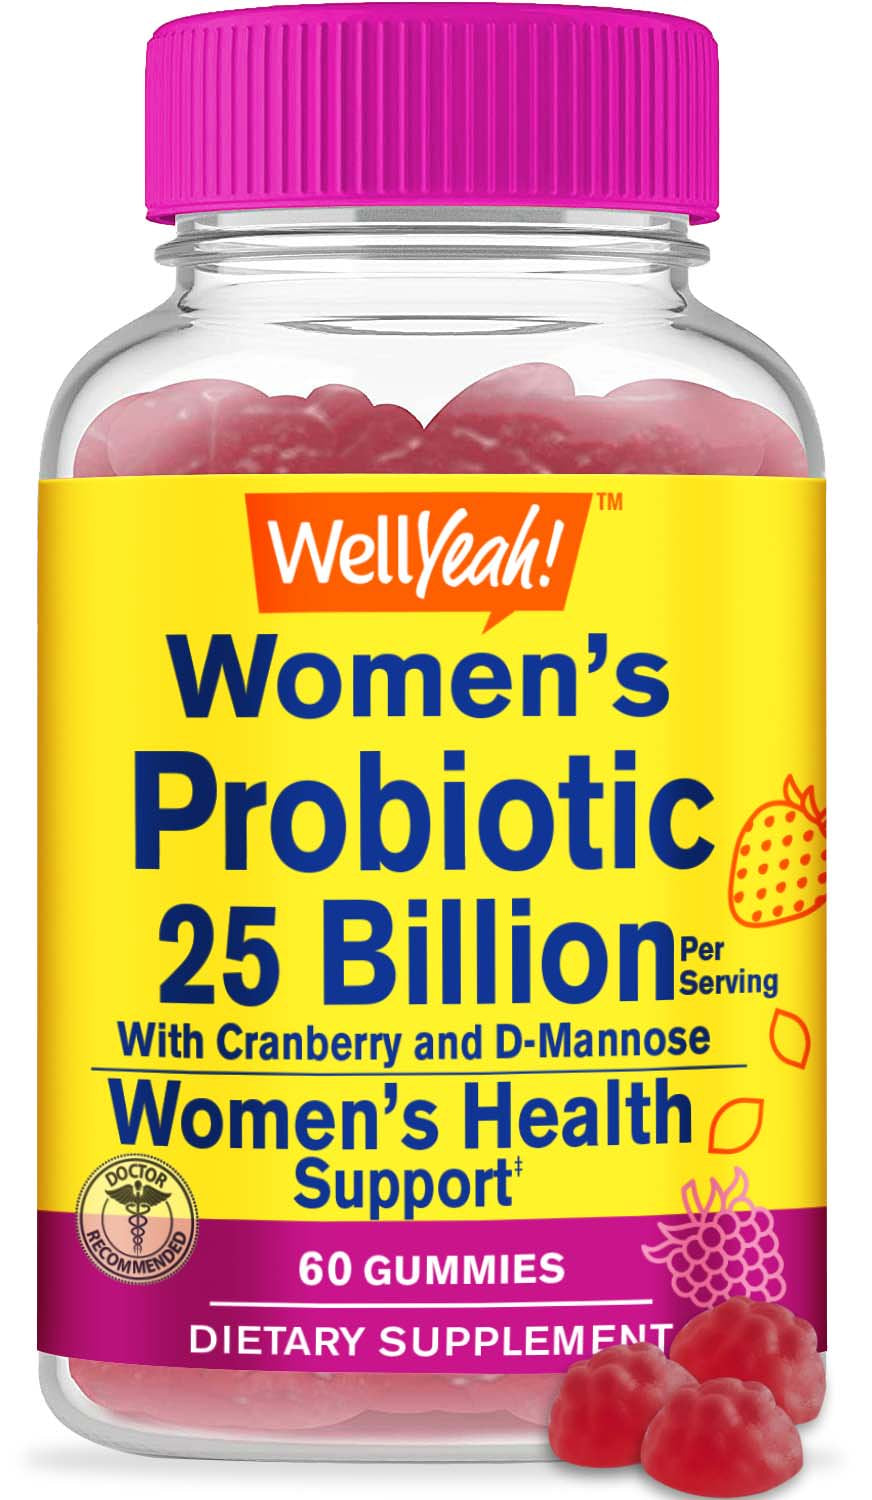 Wellyeah 25 Billion Probiotics for Women with Cranberry and D-Mannose Gummies - Vaginal Health, Digestive Support, Gut Health, and Feminine Health - Womens Probiotic with 12 Strains - 60 Gummies